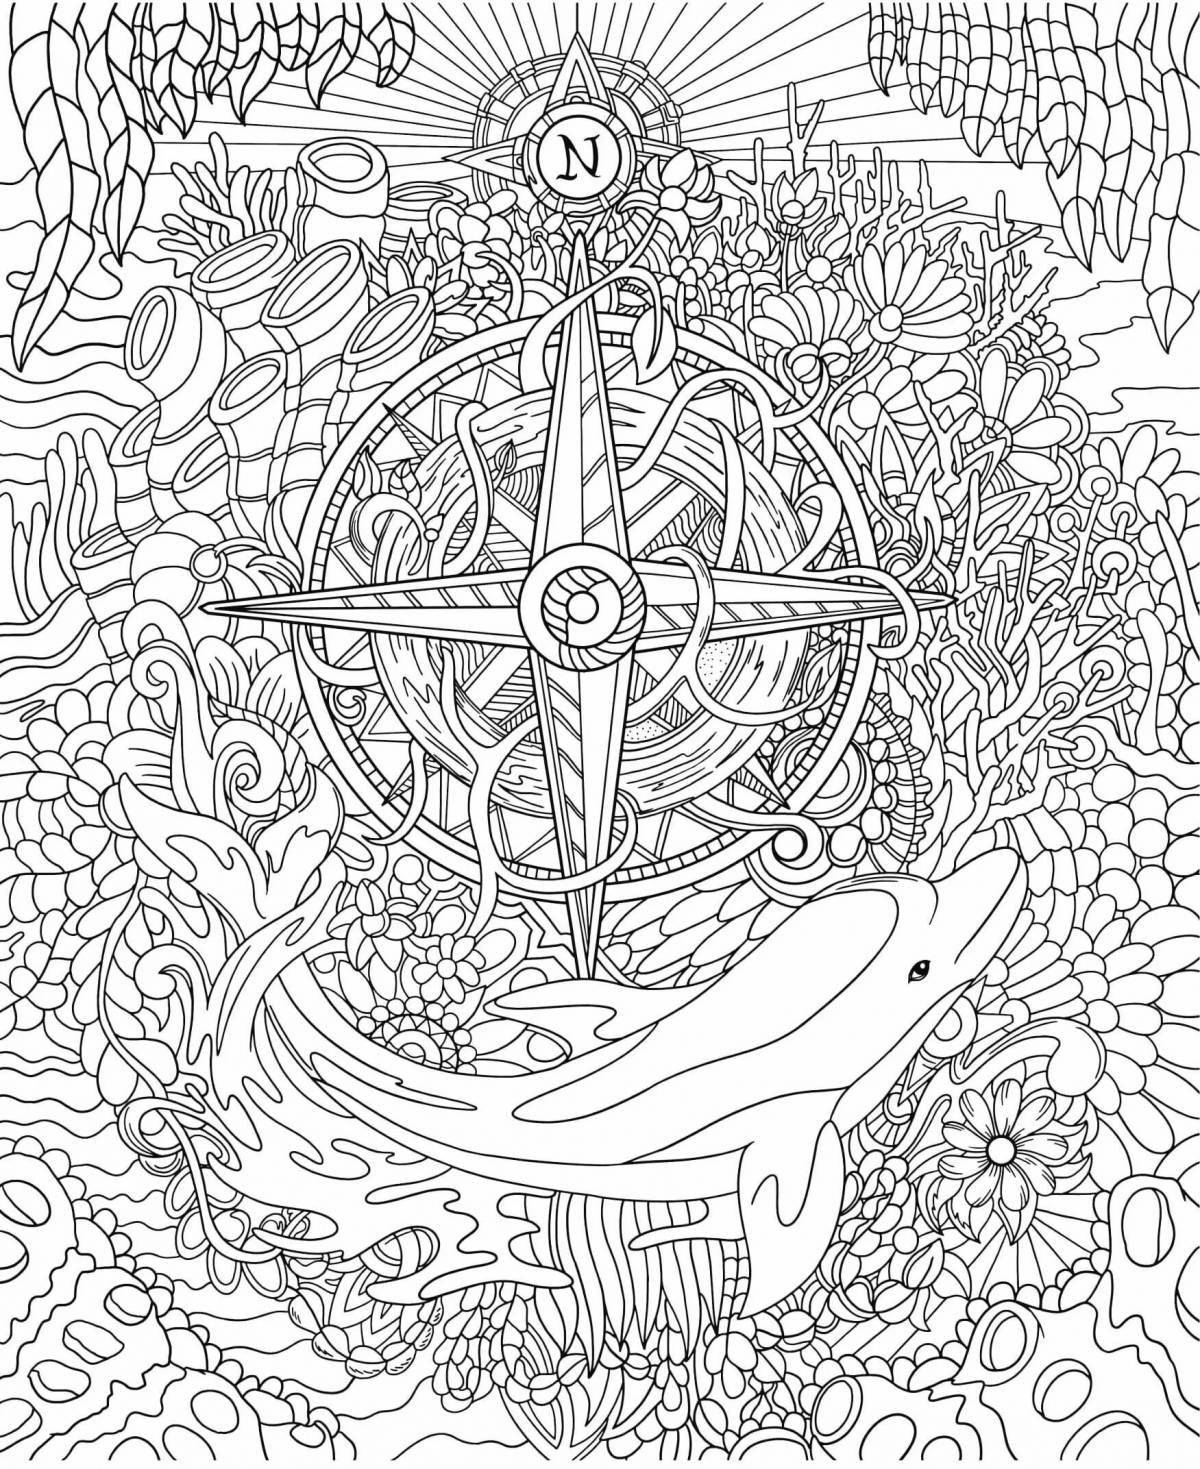 Coloring book colorful space complex